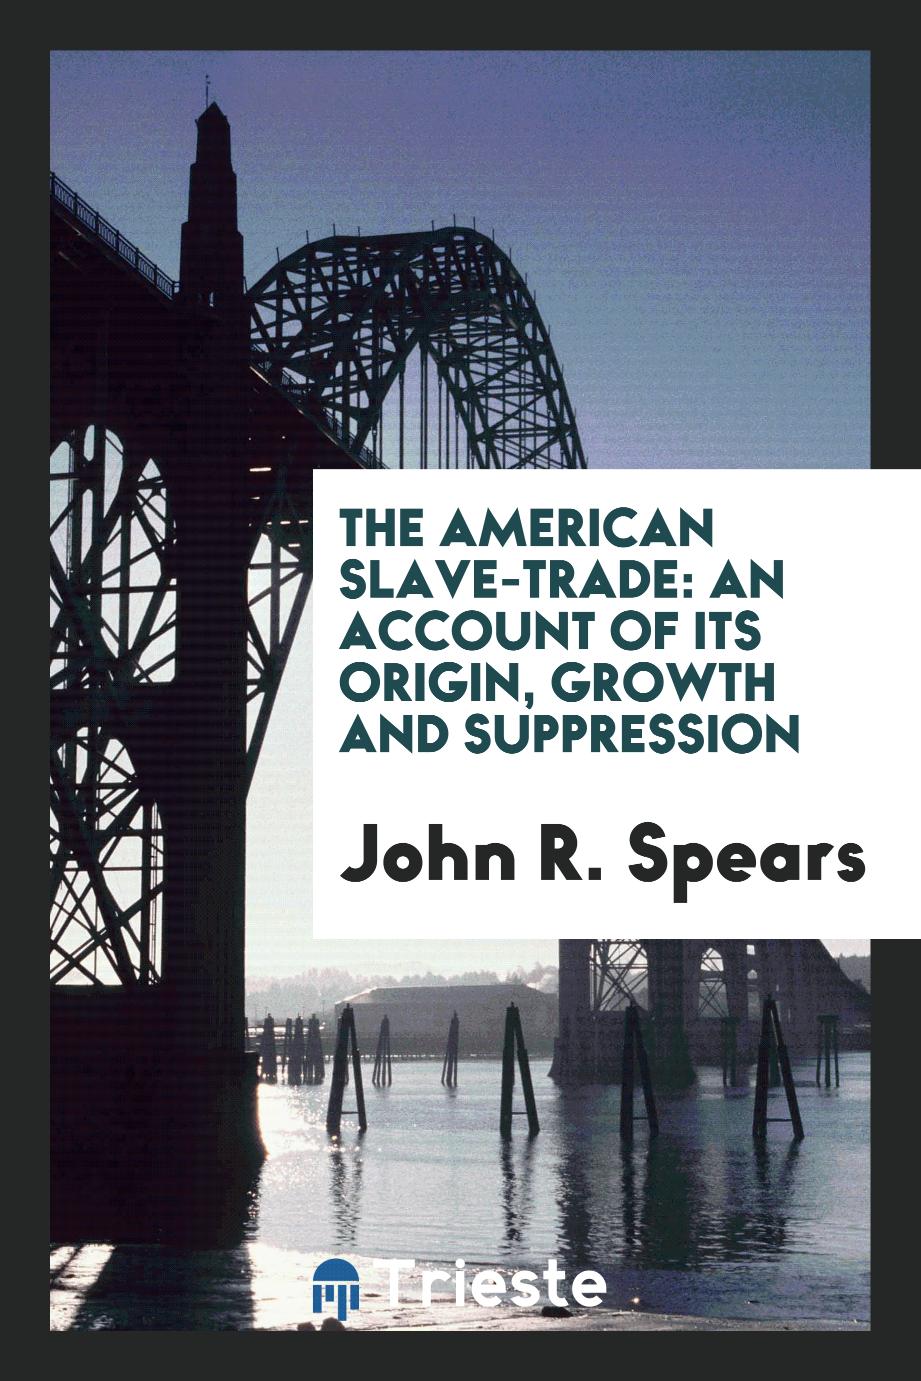 The American slave-trade: an account of its origin, growth and suppression